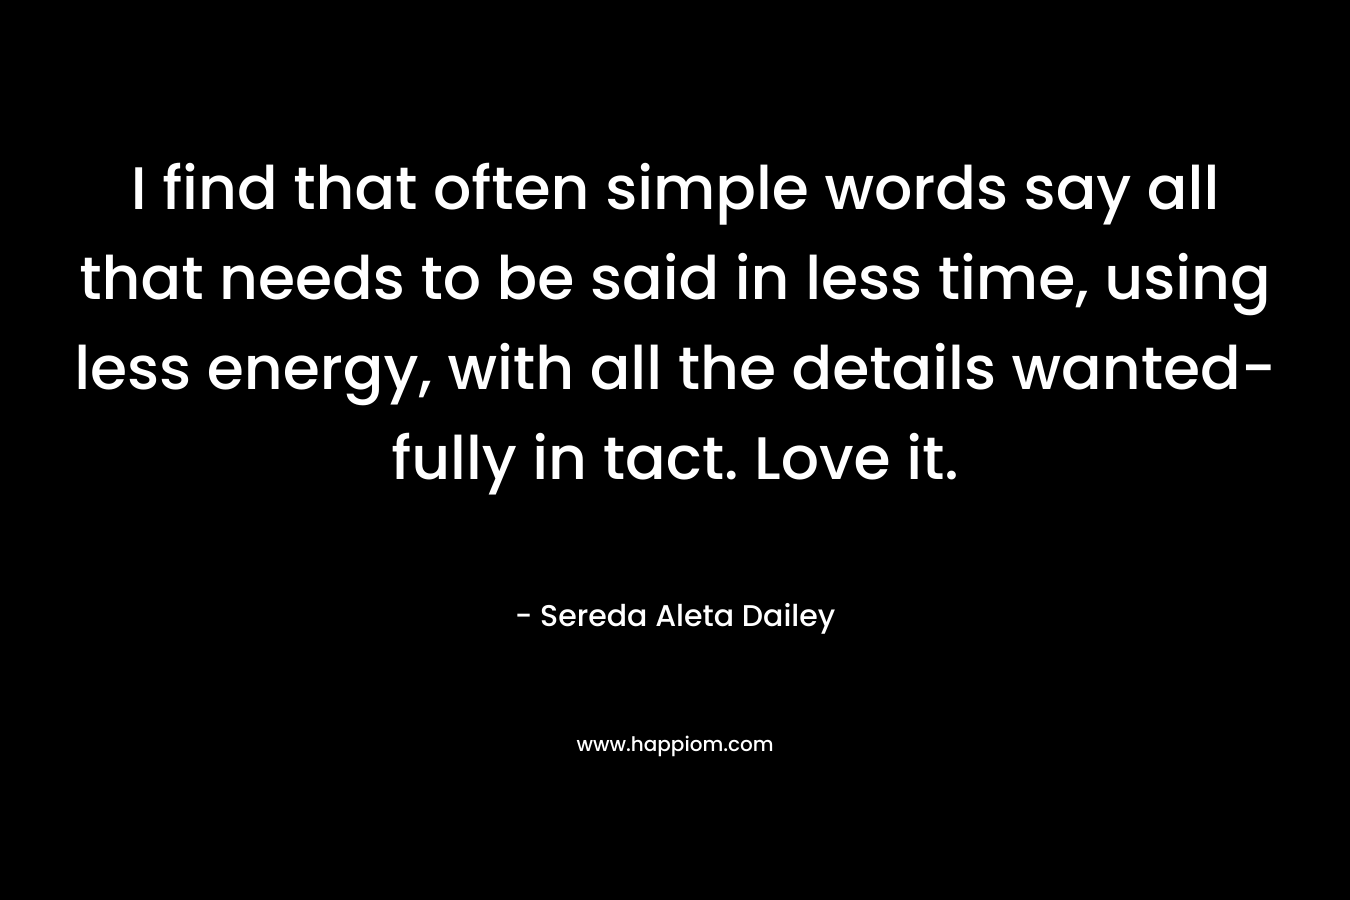 I find that often simple words say all that needs to be said in less time, using less energy, with all the details wanted- fully in tact. Love it. – Sereda Aleta Dailey